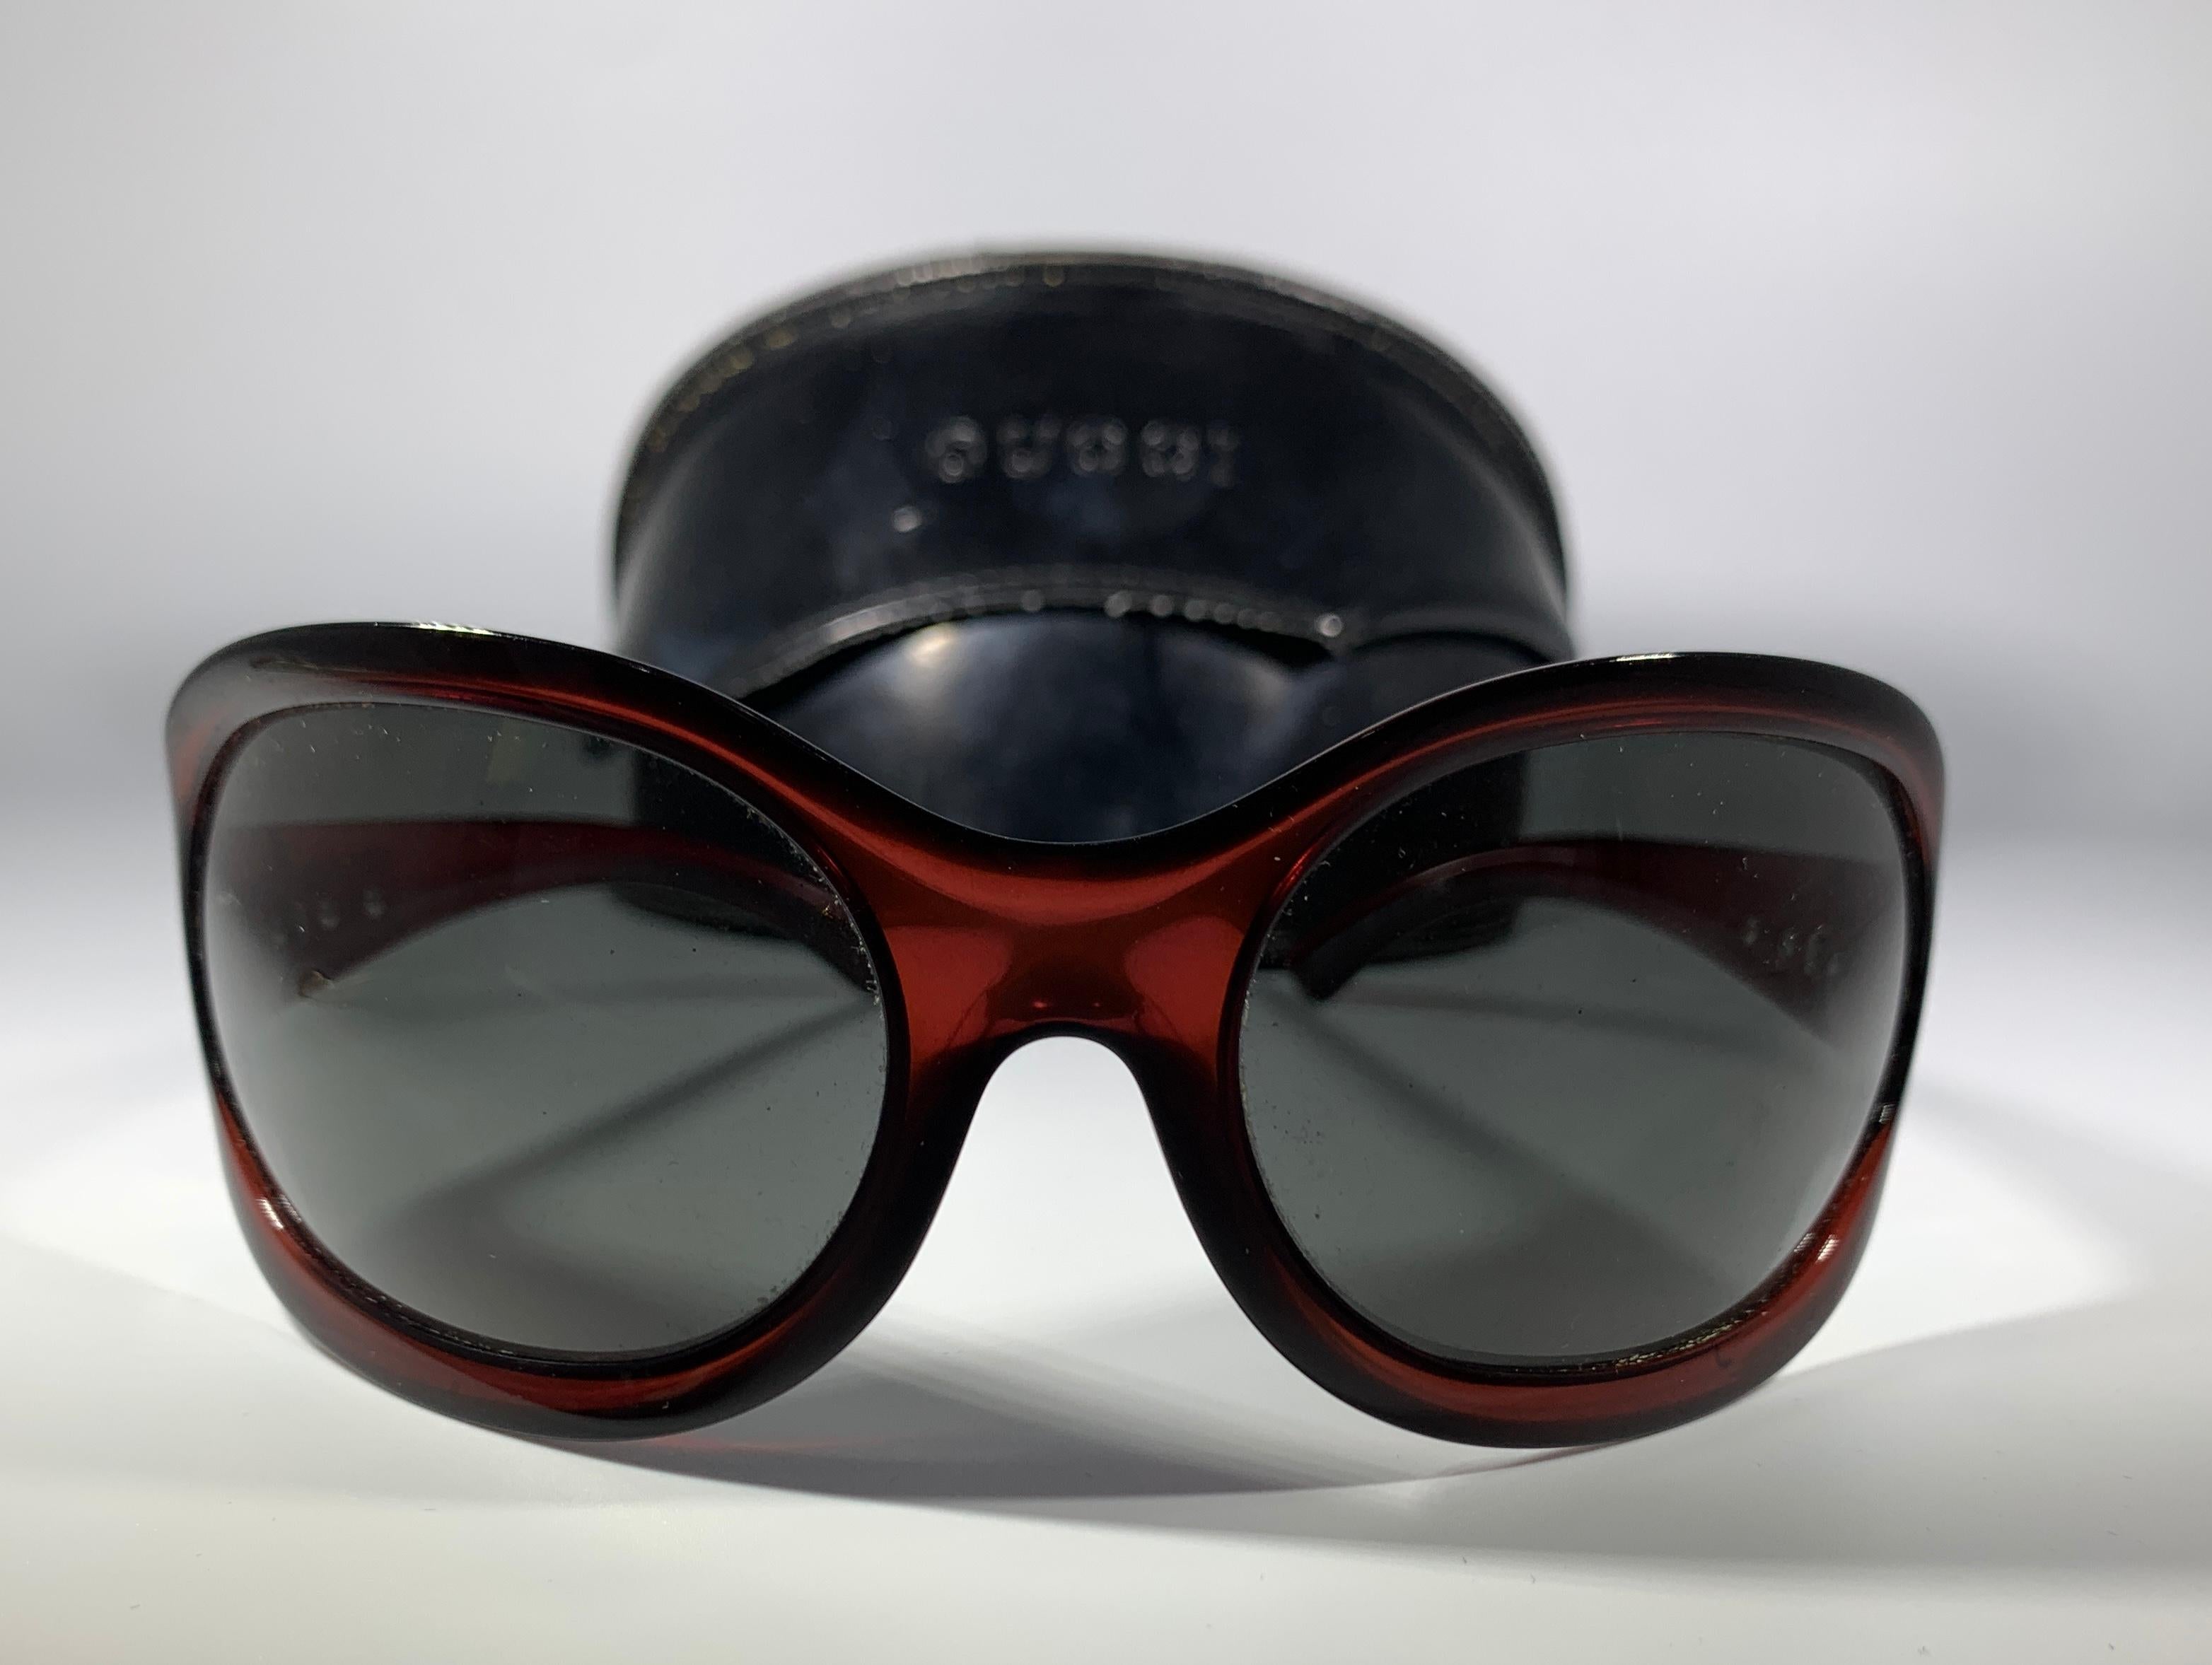 Gucci GG 1488/S  AY3  69 21 110 Brand New  Brown Women Sunglasses, Made in Italy
69   21  110
GG 1488/S  AY3
OPTYL
Great Gift just in time for Holidays
Amazing and High Fashionable Sun Glasses
Full money Back Guaranteed. 
Monalisa Jewelry Inc.
We